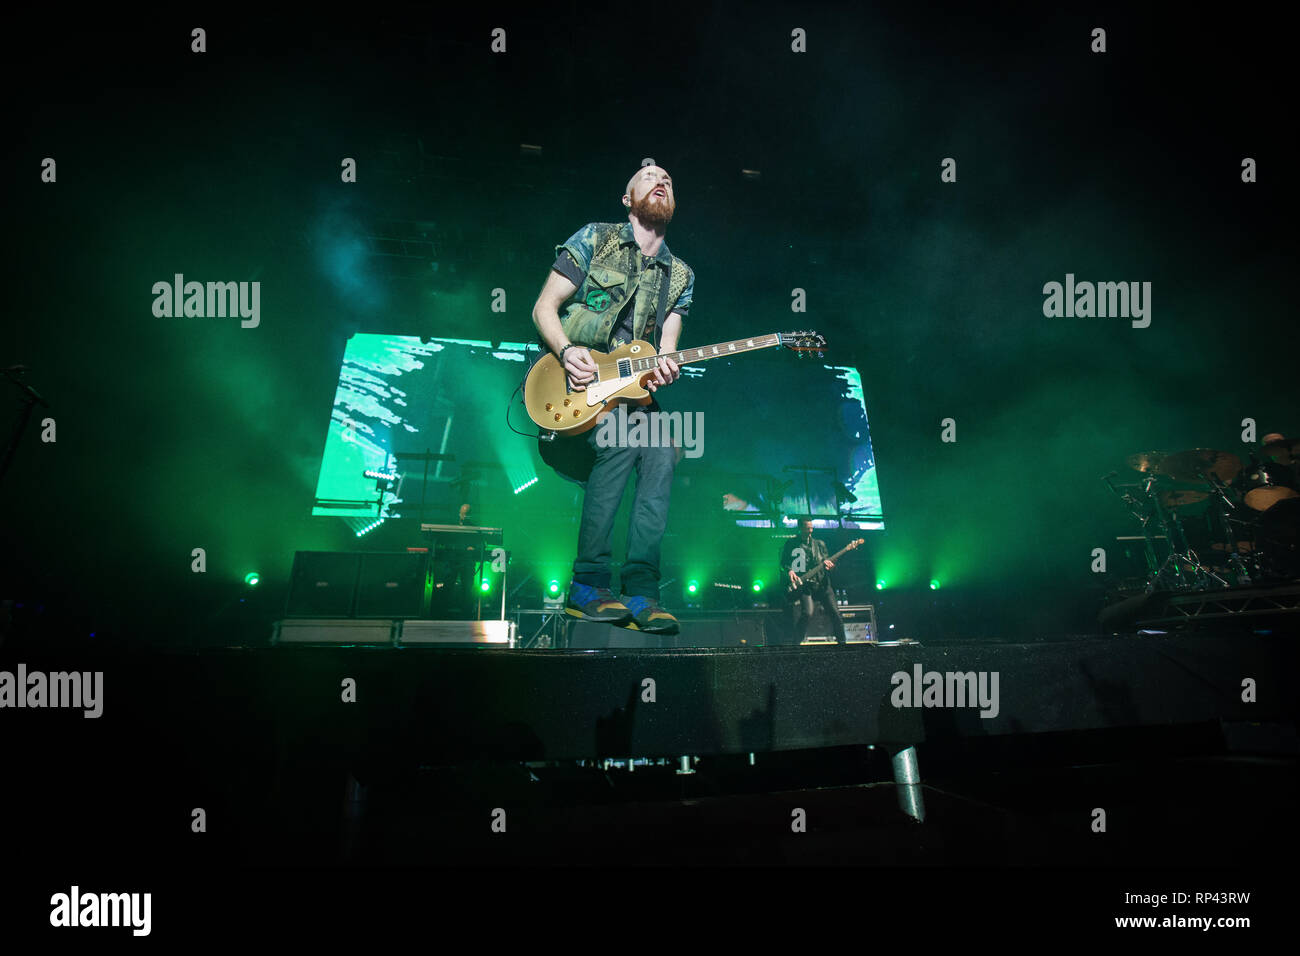 The Irish pop rock band The Script performs a live concert at the Danish music festival Jelling Festival 2015. Here guitarist Mark Sheehan is seen live on stage. Denmark, 23/05 2015. EXCLUDING DENMARK. Stock Photo